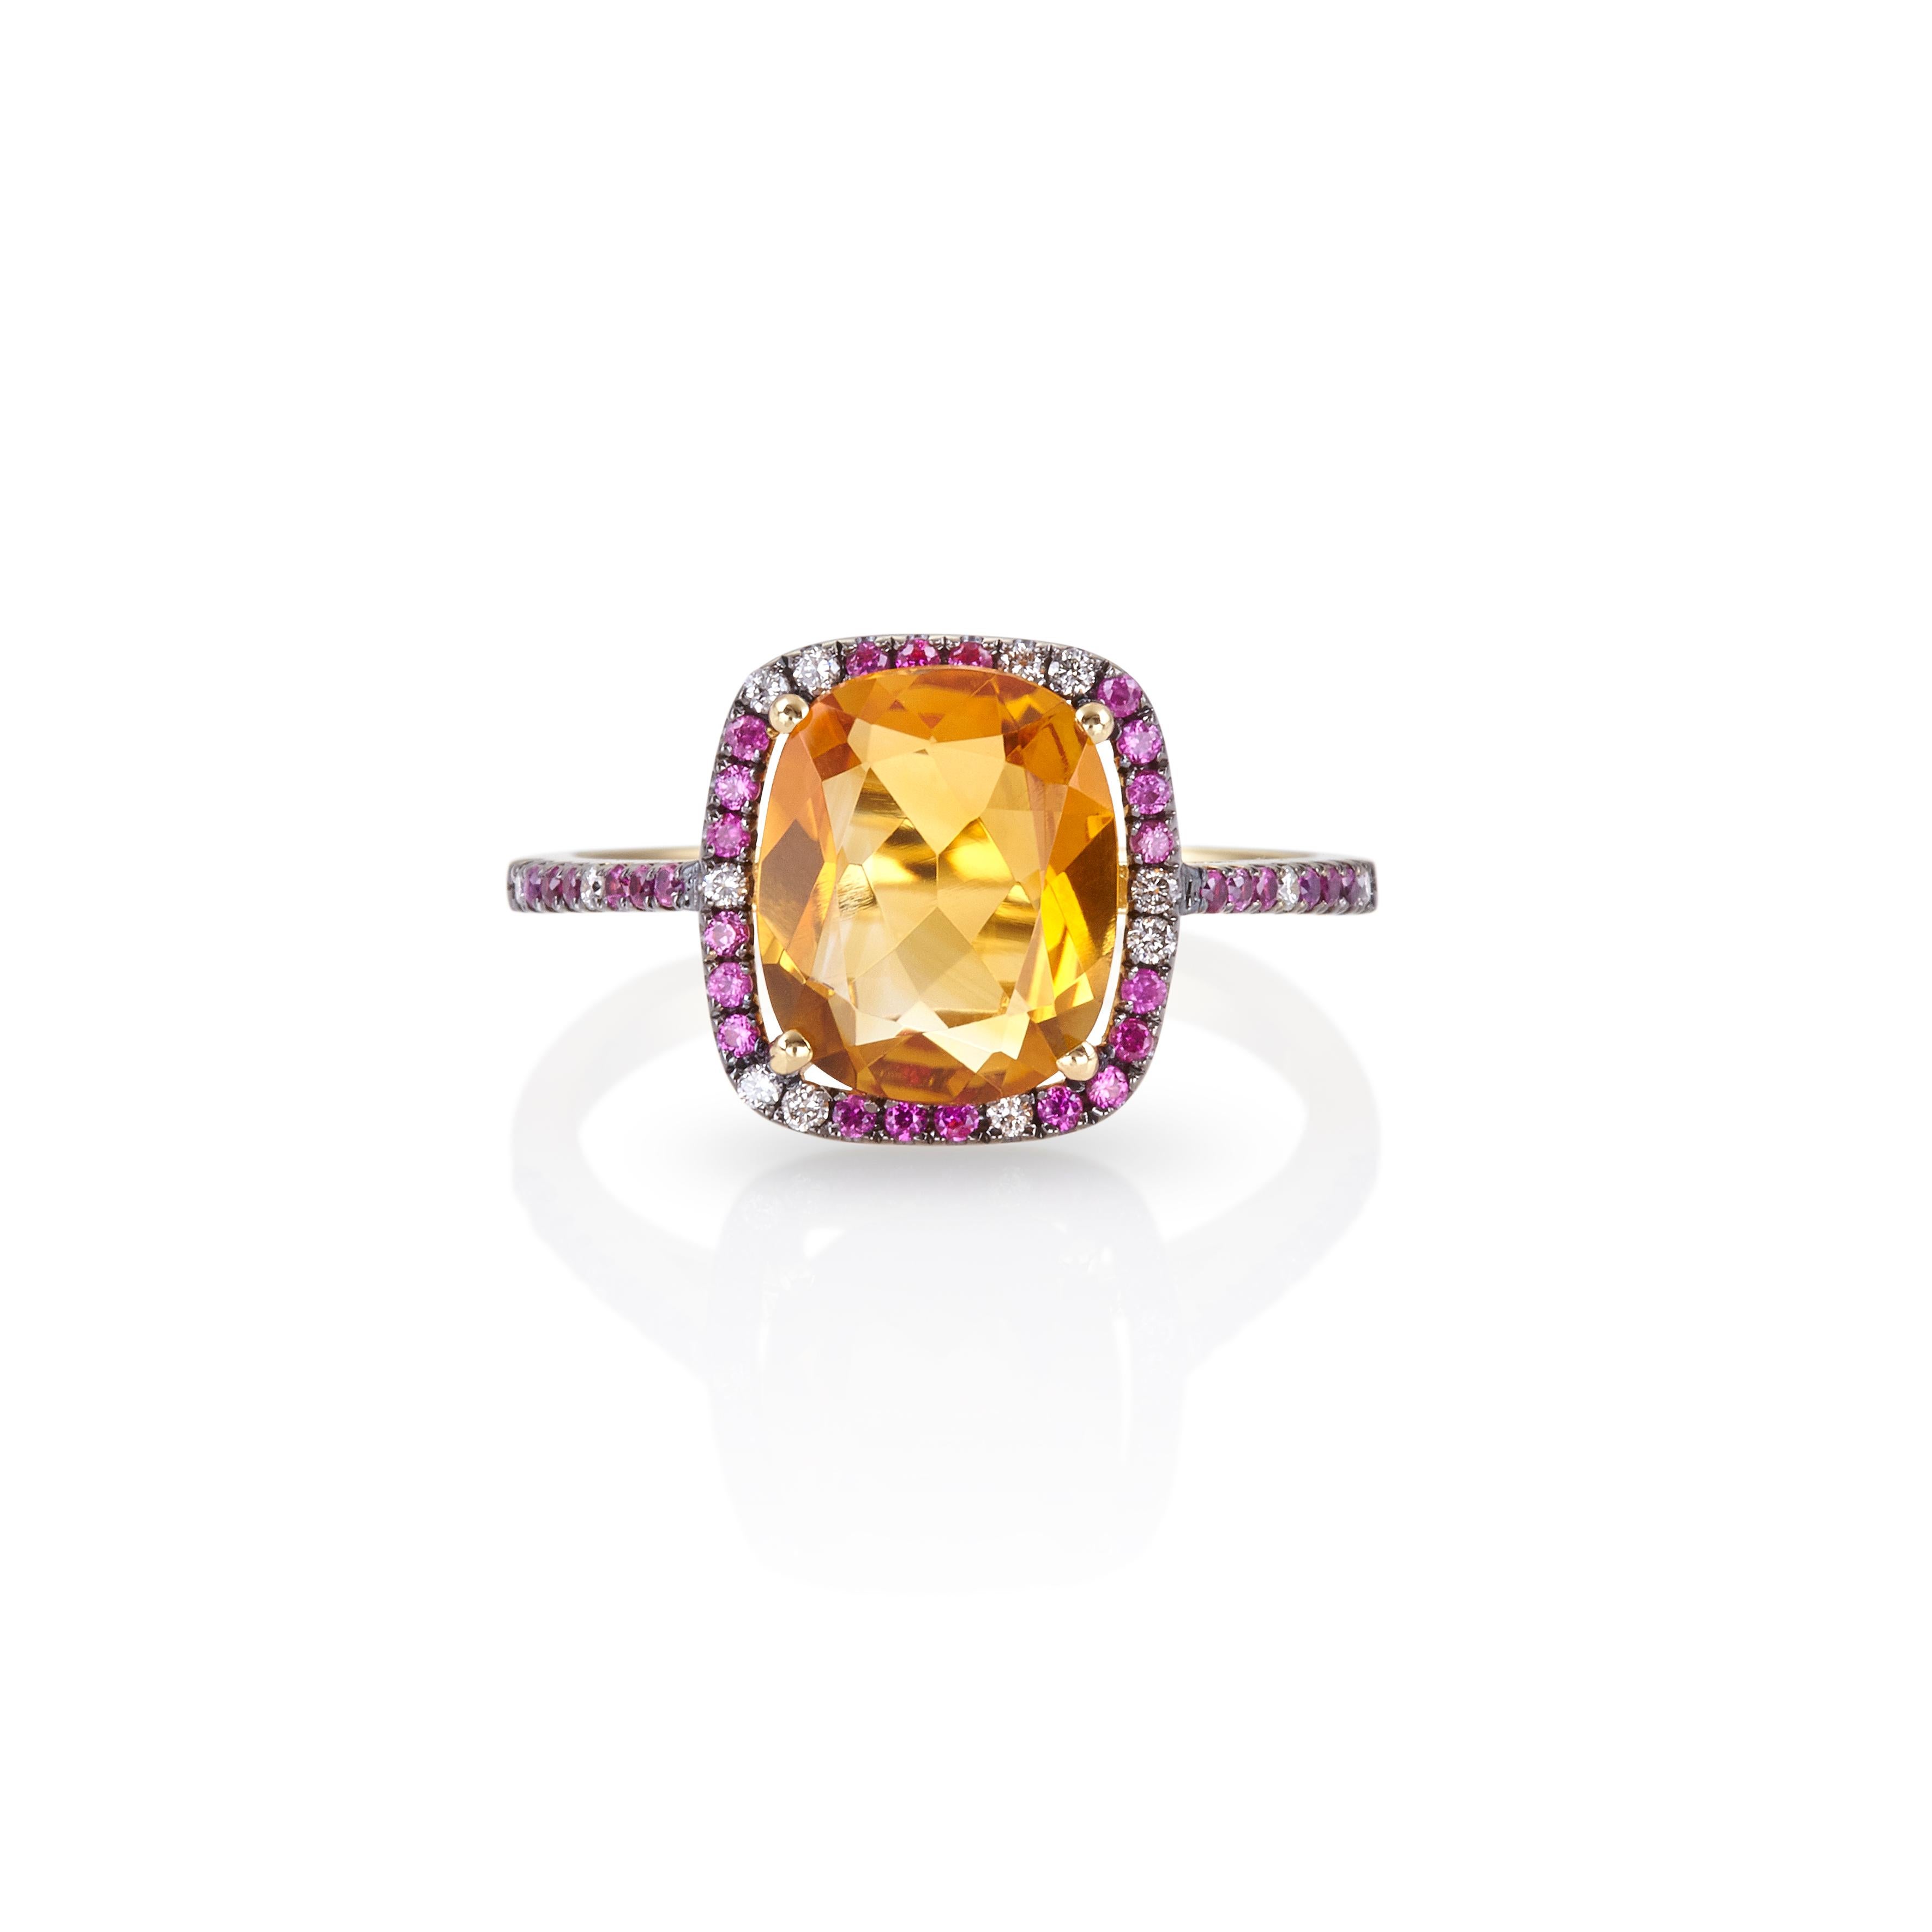 For Sale:  Colorful Flush Ring in 18kt Yellow Gold with Citrine Pink Sapphires and Diamonds 2